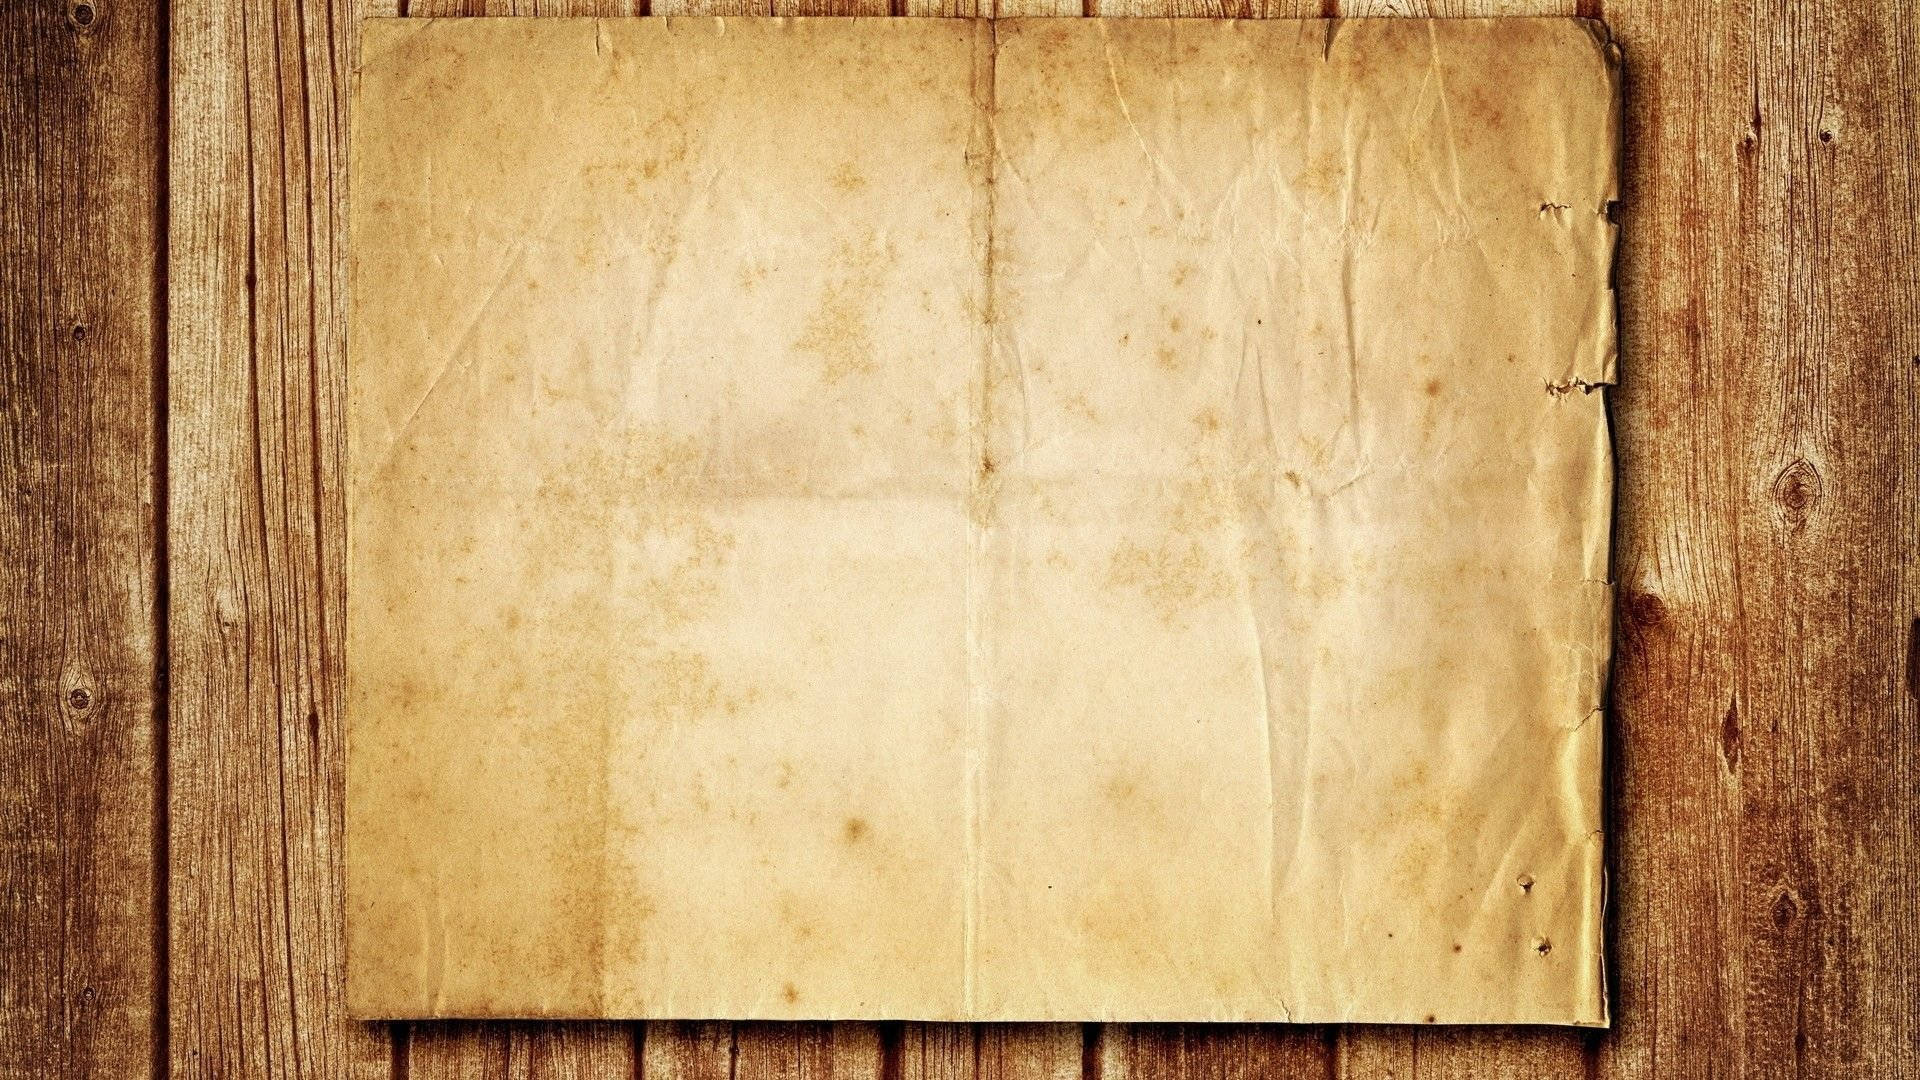 Vintage Styled Old Paper On Wooden Board Background